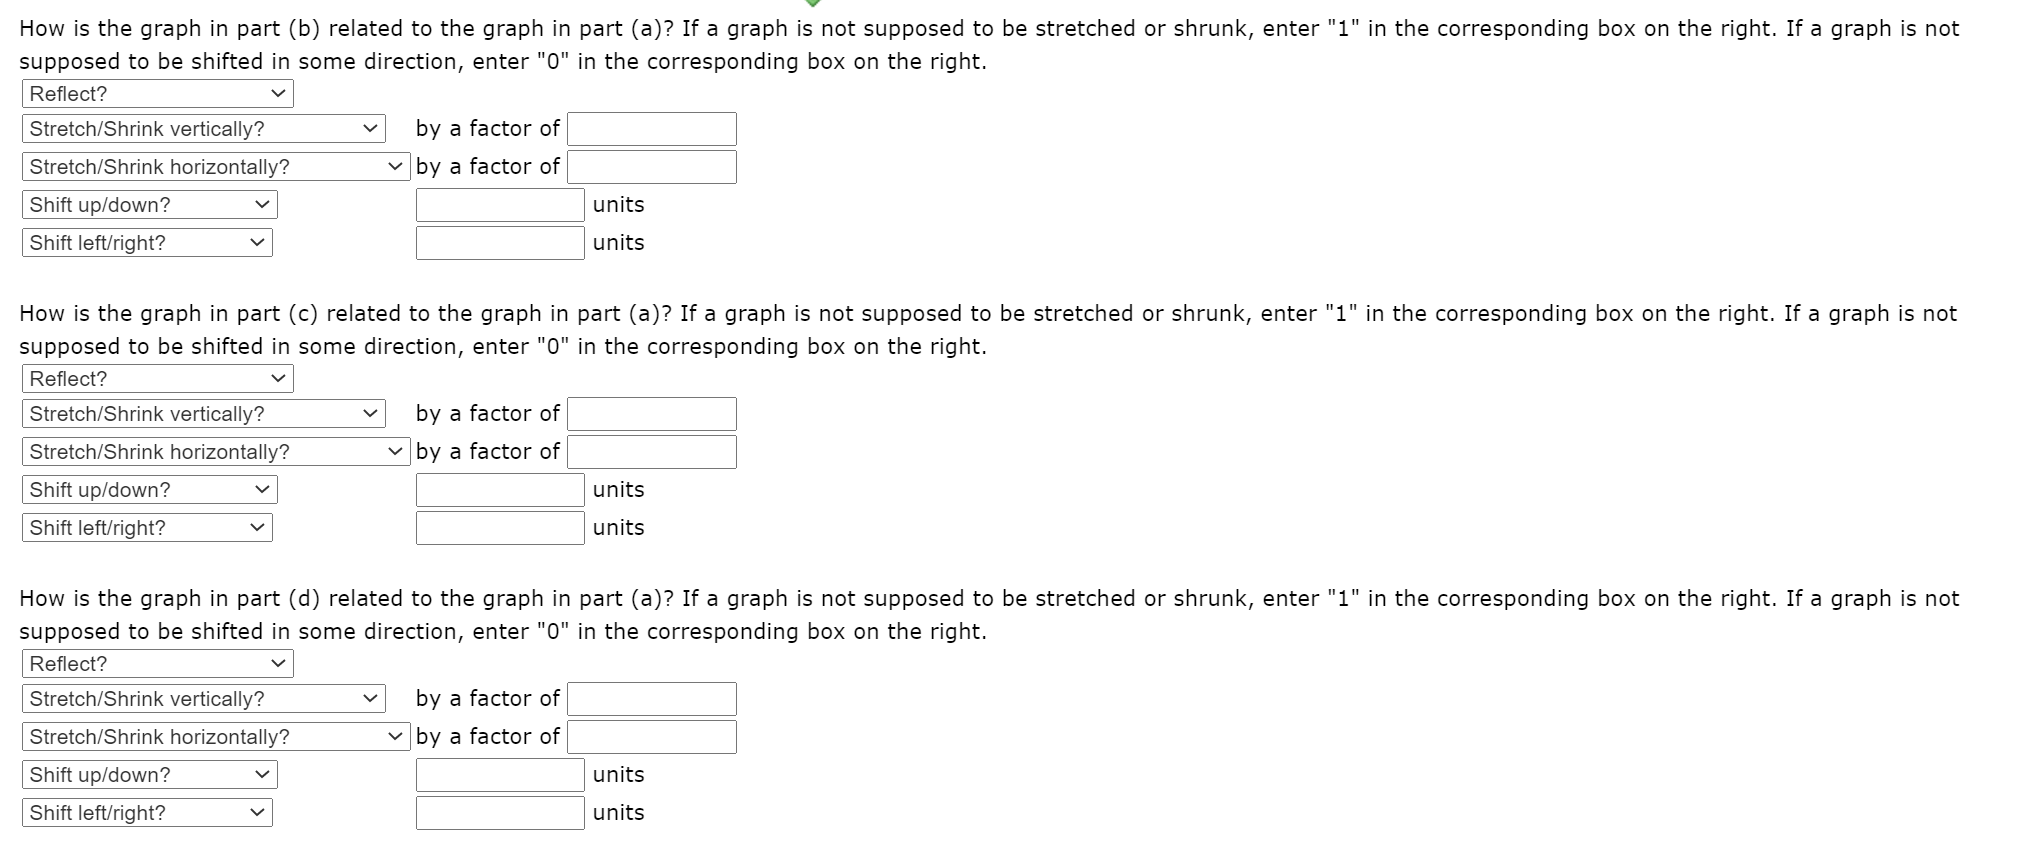 How is the graph in part (b) related to the graph in part (a)? If a graph is not supposed to be stretched or shrunk, enter "1" in the corresponding box on the right. If a graph is not
supposed to be shifted in some direction, enter "0" in the corresponding box on the right.
Reflect?
Stretch/Shrink vertically?
by a factor of
Stretch/Shrink horizontally?
v by a factor of
Shift up/down?
units
Shift left/right?
units
How is the graph in part (c) related to the graph in part (a)? If a graph is not supposed to be stretched or shrunk, enter "1" in the corresponding box on the right. If a graph is not
supposed to be shifted in some direction, enter "0" in the corresponding box on the right.
Reflect?
Stretch/Shrink vertically?
by a factor of
Stretch/Shrink horizontally?
v by a factor of
Shift up/down?
units
Shift left/right?
units
How is the graph in part (d) related to the graph in part (a)? If a graph is not supposed to be stretched or shrunk, enter "1" in the corresponding box on the right. If a graph is not
supposed to be shifted in some direction, enter "0" in the corresponding box on the right.
Reflect?
Stretch/Shrink vertically?
by a factor of
Stretch/Shrink horizontally?
by a factor of
Shift up/down?
units
Shift left/right?
units
